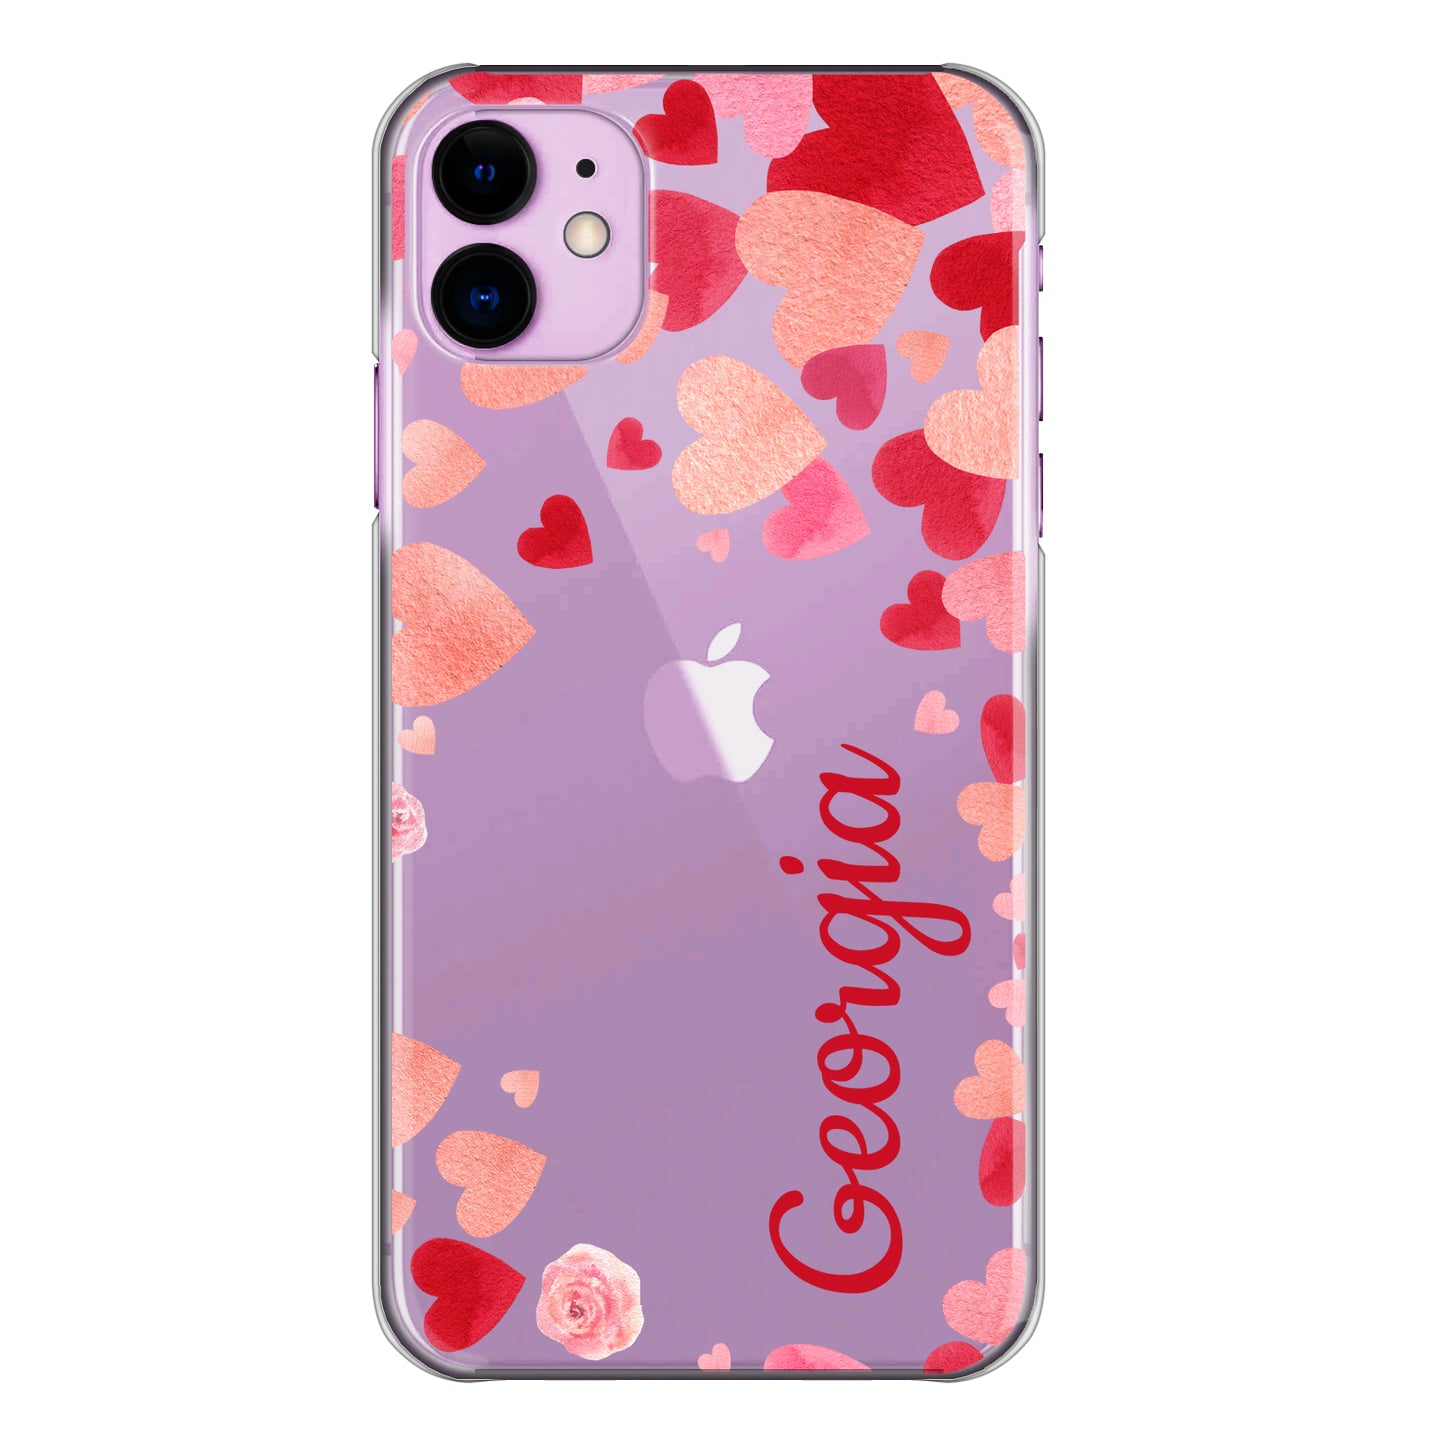 Personalised Motorola Phone Hard Case with Hearts/Roses and Stylish Red Text